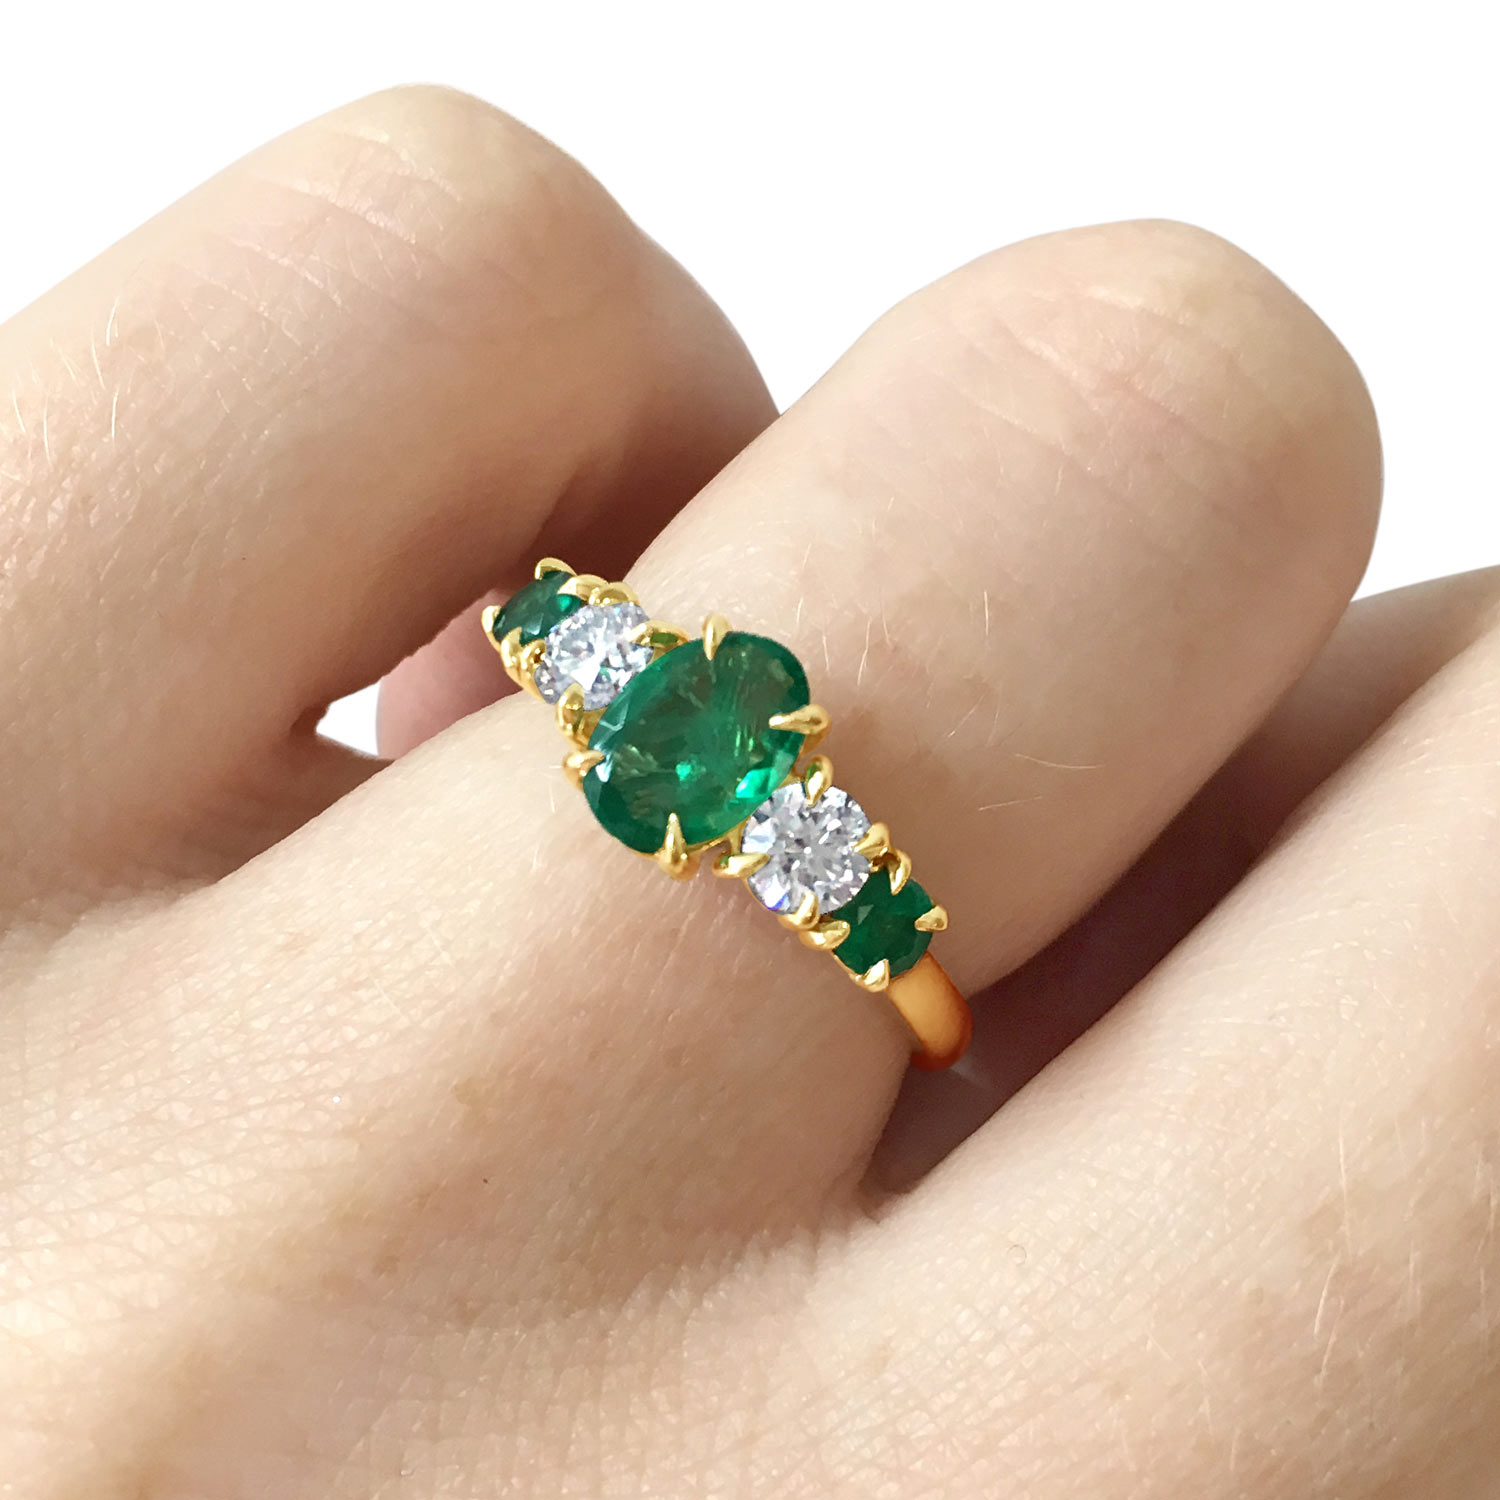 Bespoke emerald and diamond claw-set five-stone ring, mounted in 18ct yellow gold side